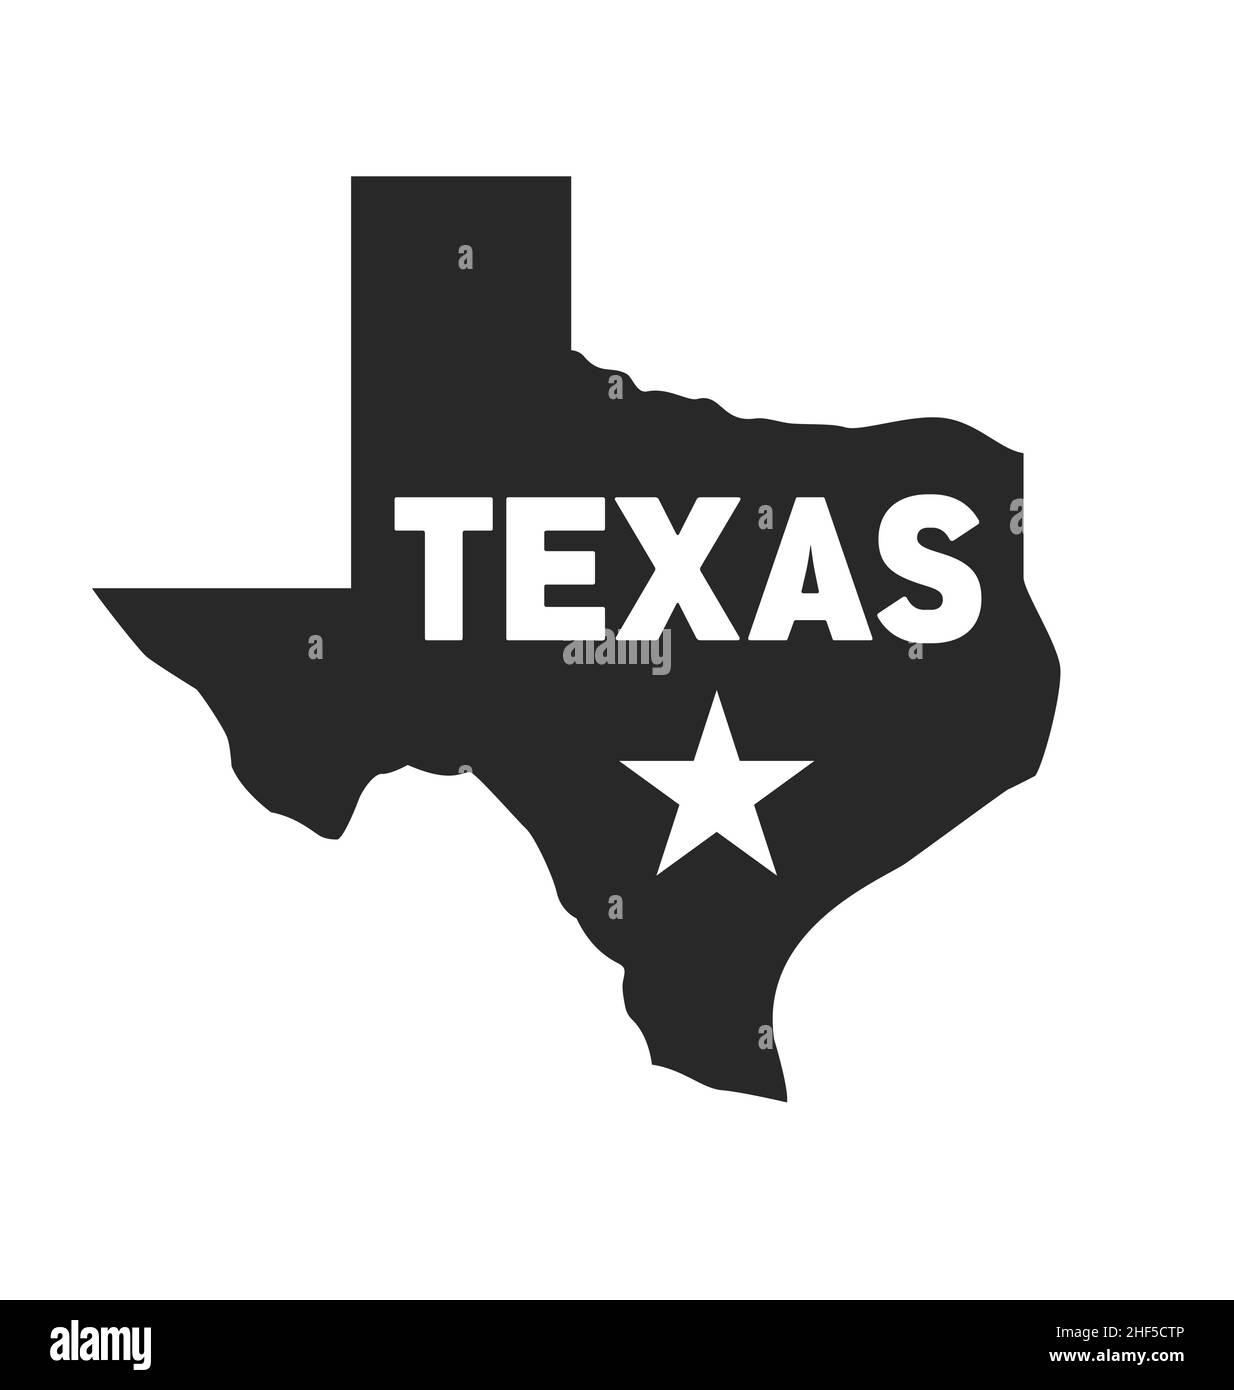 texas state map silhouette shape symbol with text and lone star vector isolated on white background Stock Vector